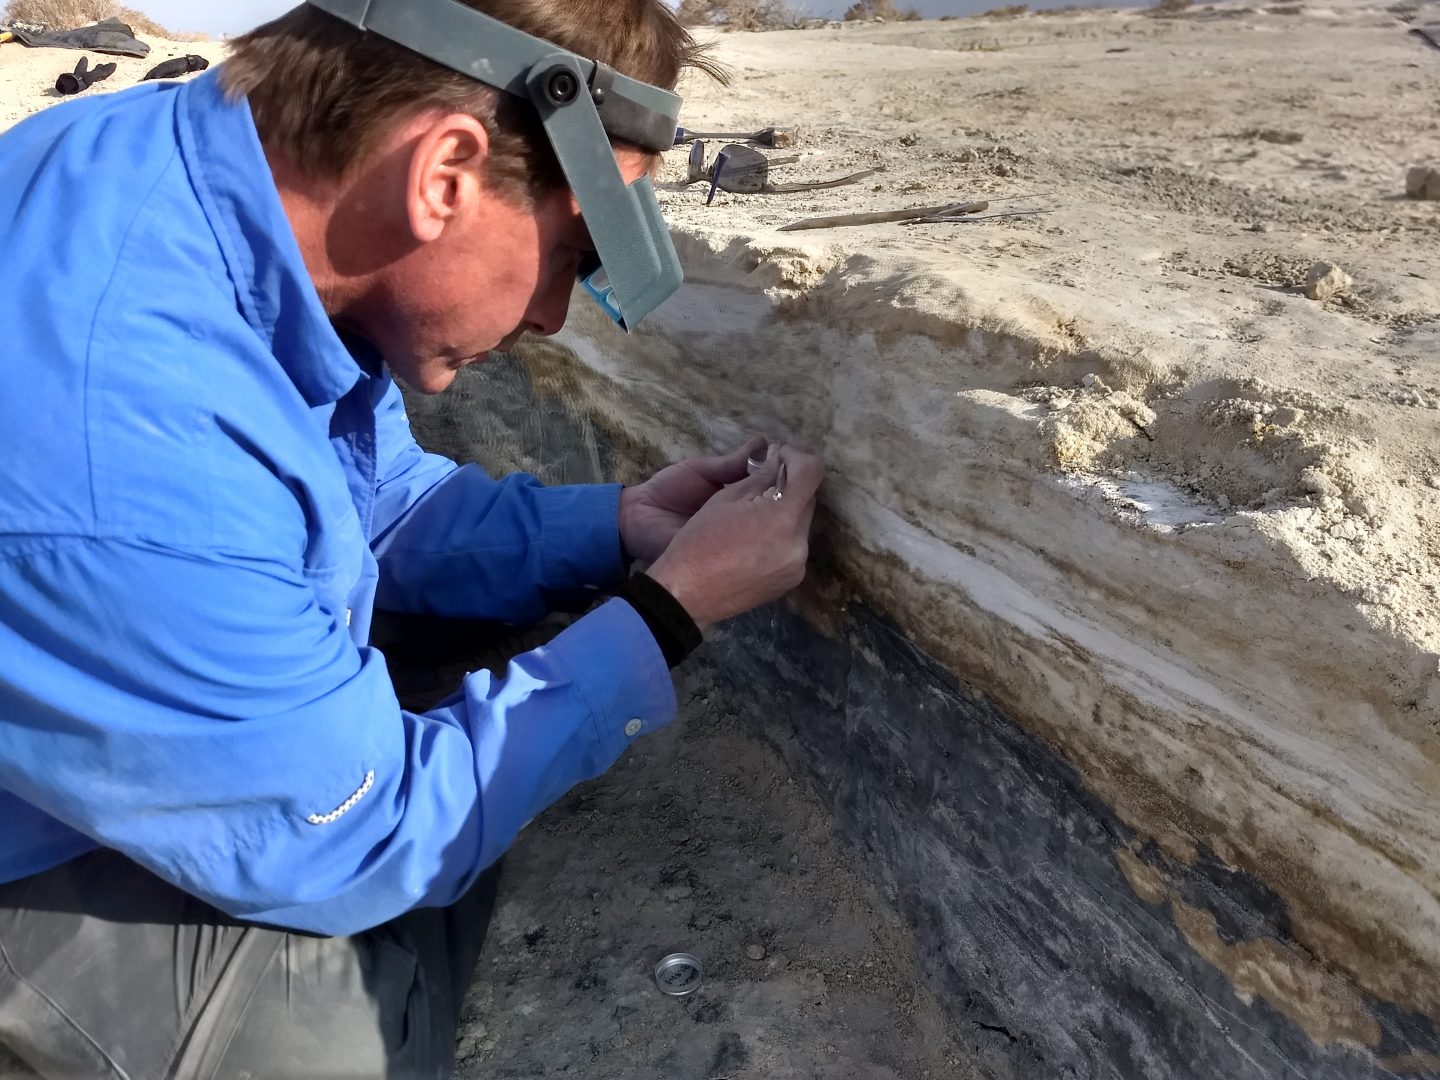 Jeff Pigati, a geologist with the U.S. Geological Survey, picks at one of the sedimentary layers in the trench to more closely examine the seeds found in the layer.